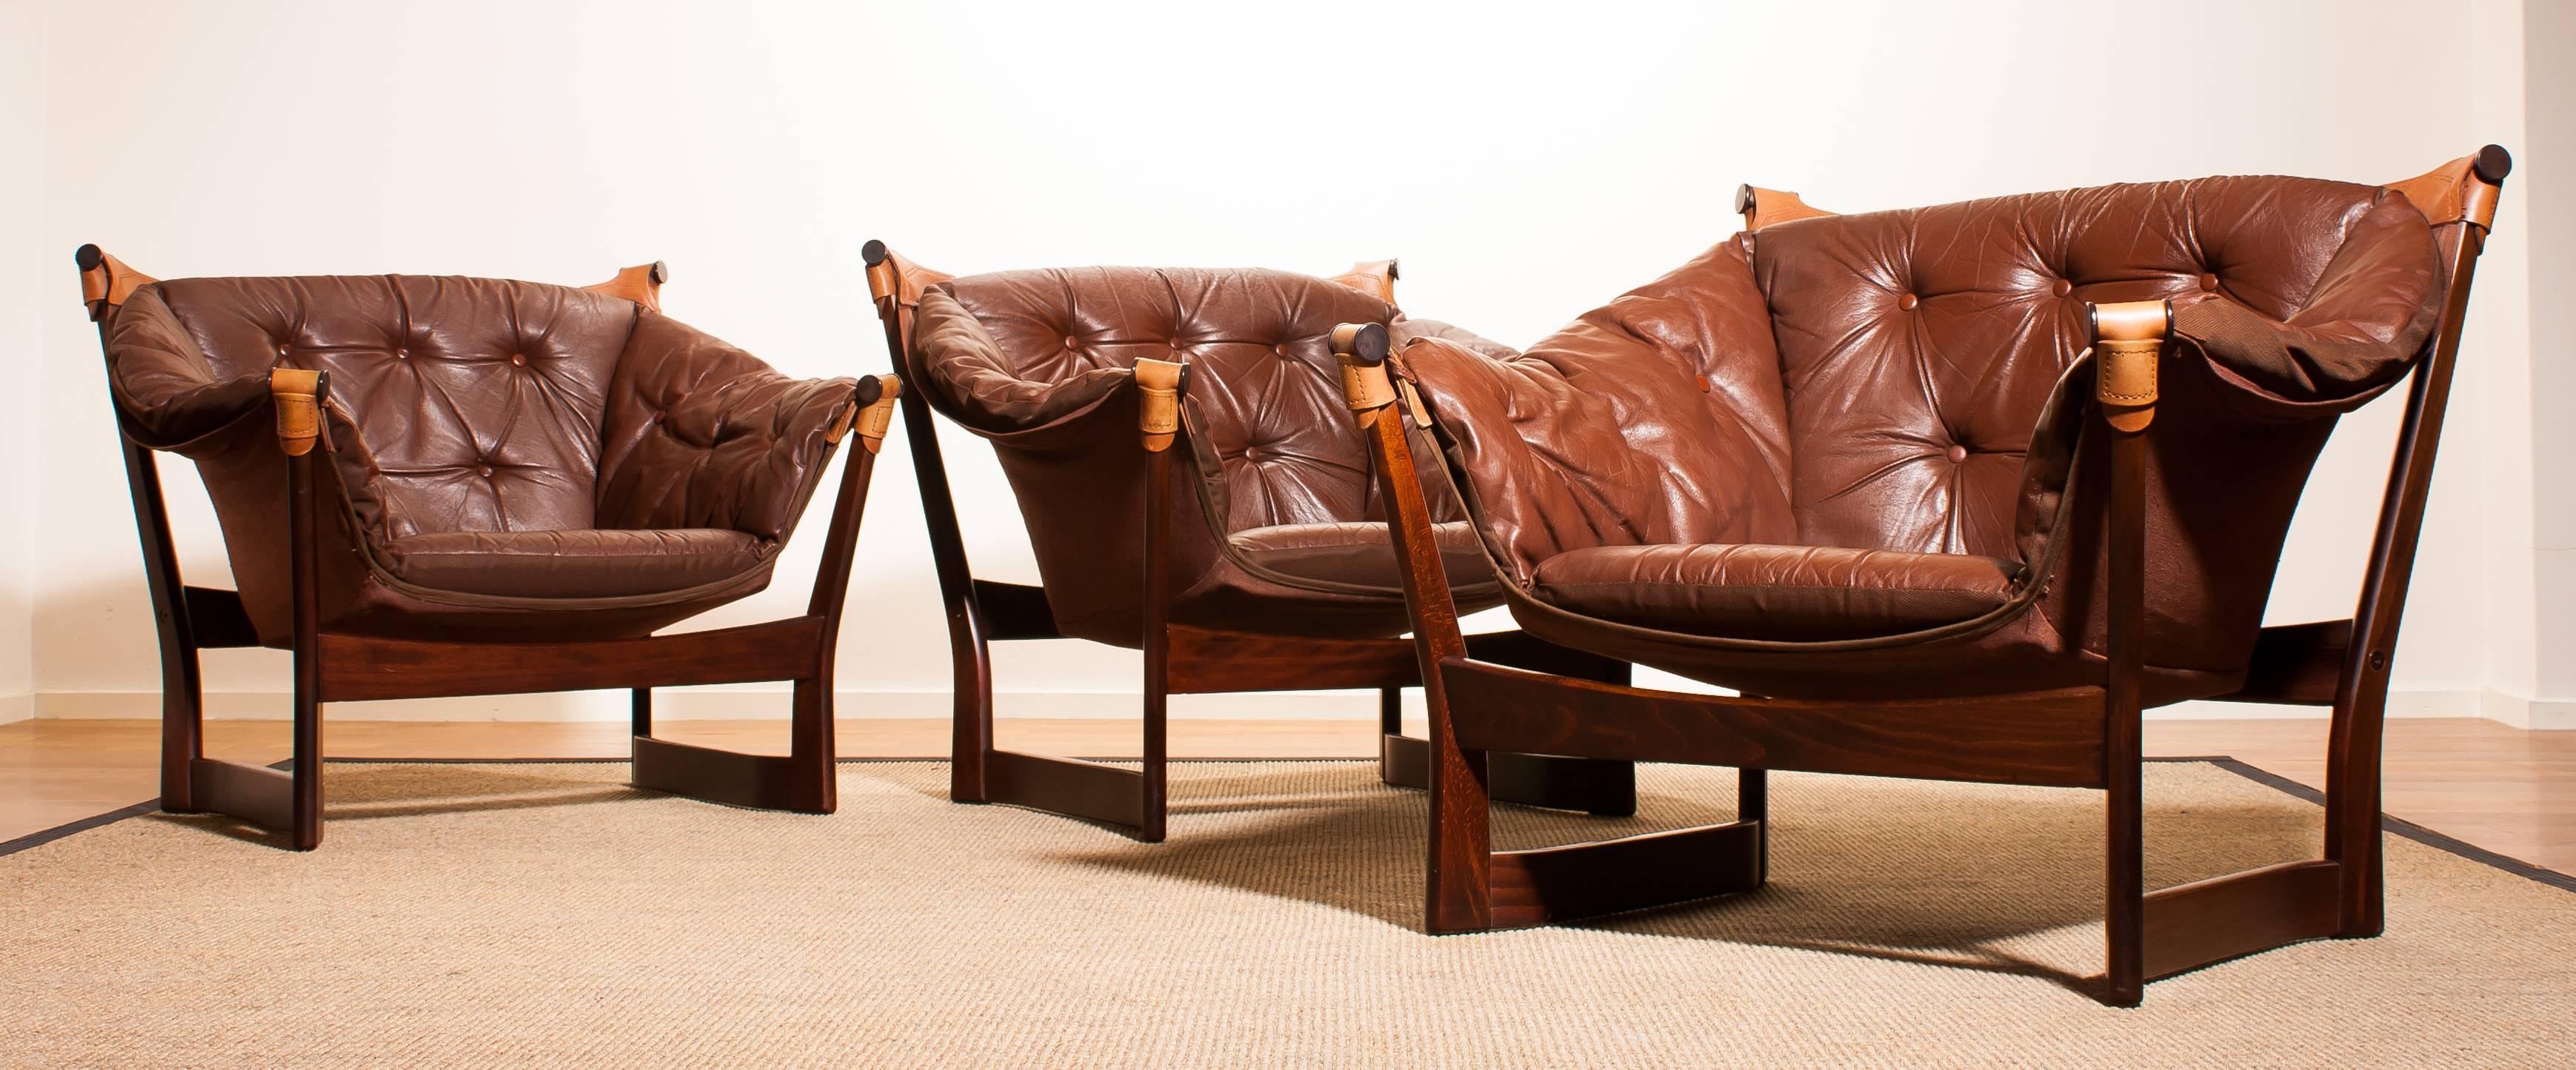 Mid-20th Century 1950s, Teak and Leather Set 'Trega' Chairs by Tormod Alnaes for Sørliemøbler